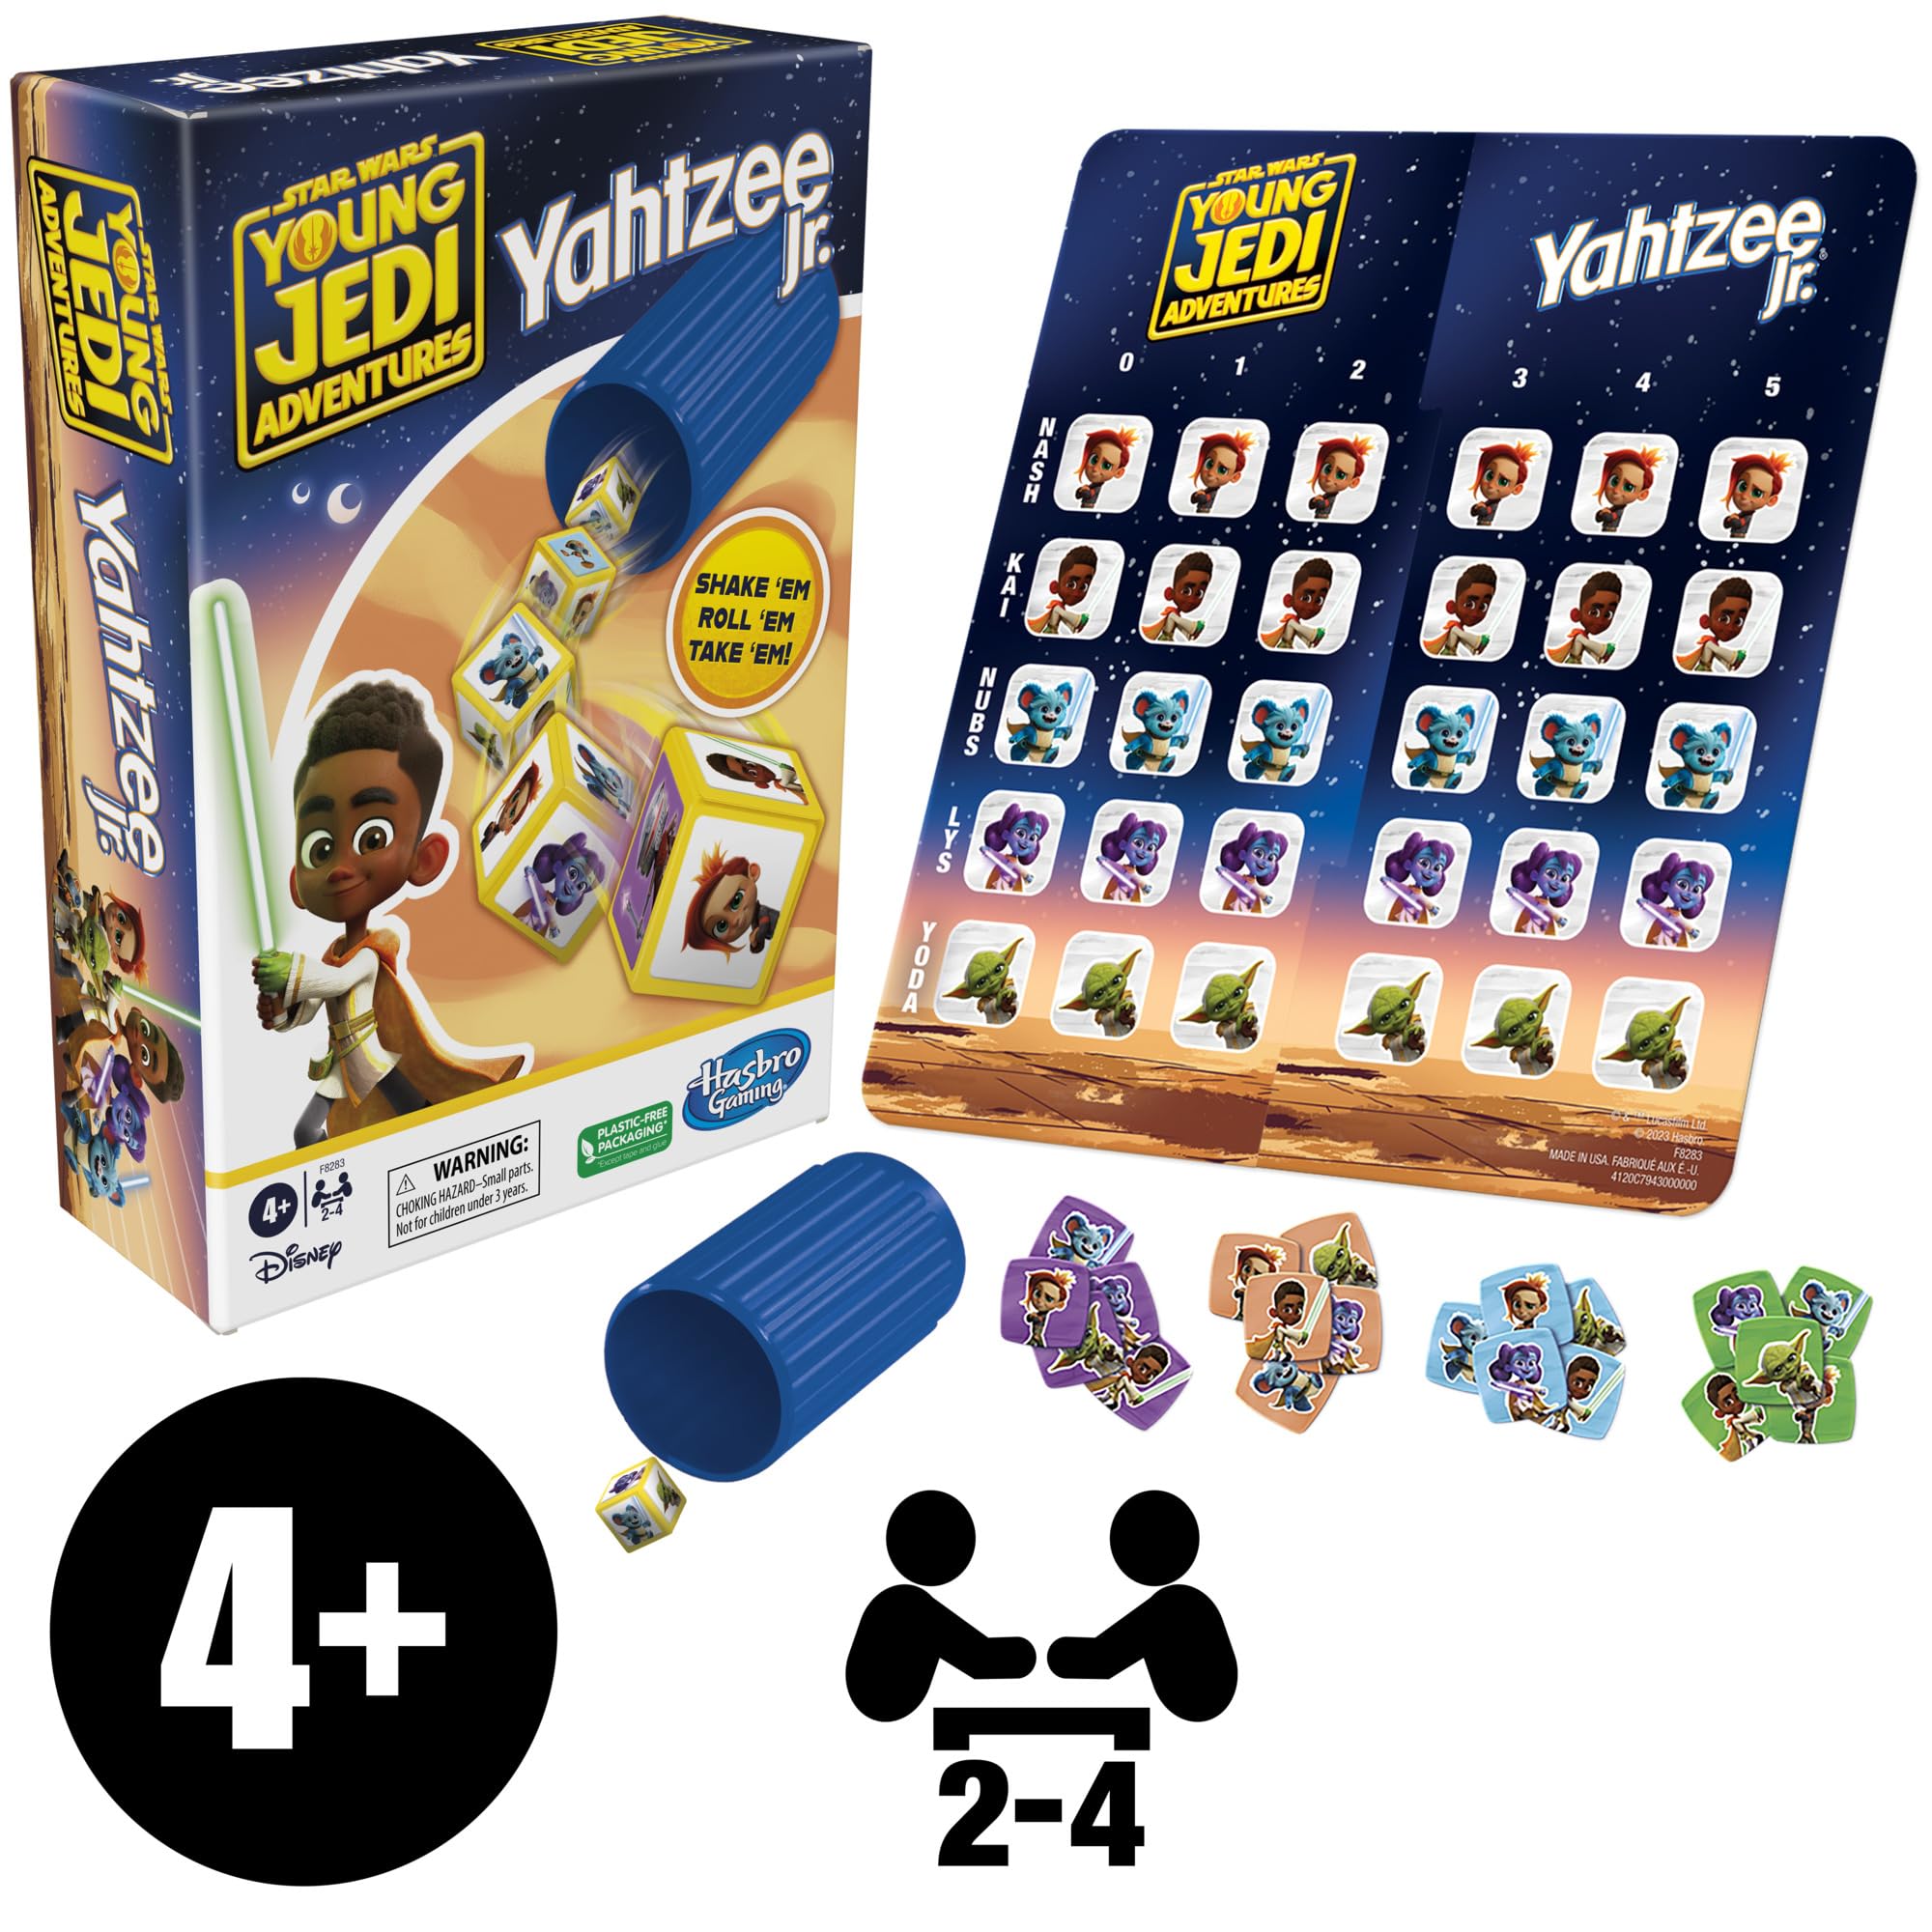 Yahtzee Jr.: Star Wars Young Jedi Adventures Edition Board Game for Kids | Ages 4+ | 2-4 Players | Counting and Matching Games for Preschoolers (Amazon Exclusive)